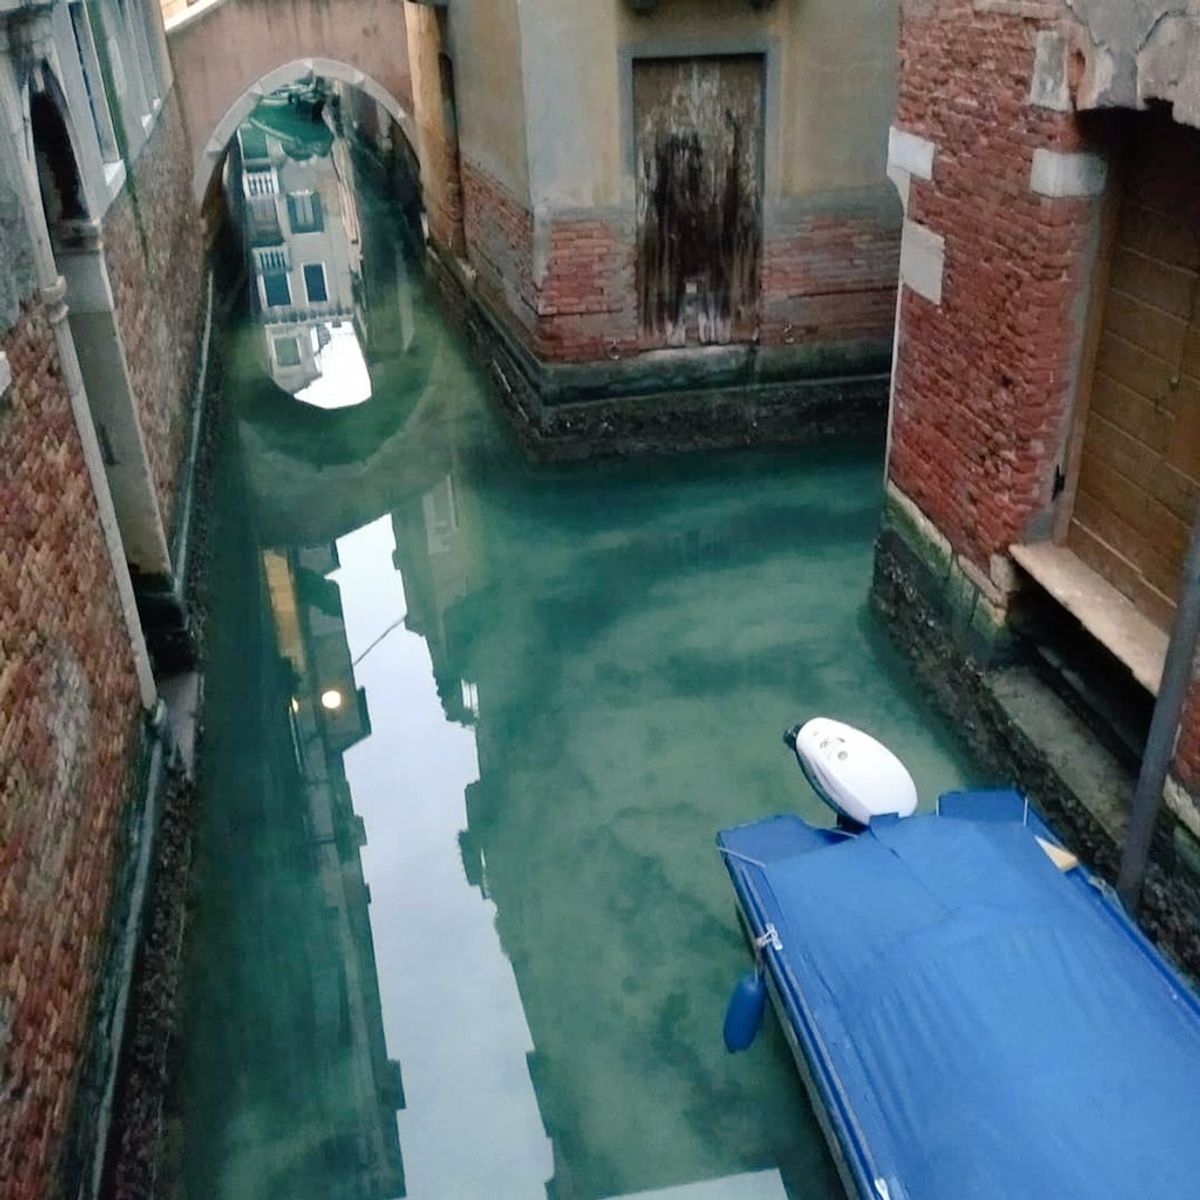 The social media account Venezia Pulita/Clean Venice has been posting images of clearer water in Venetian canals © Venezia Pulita / Clean Venice/Twitter